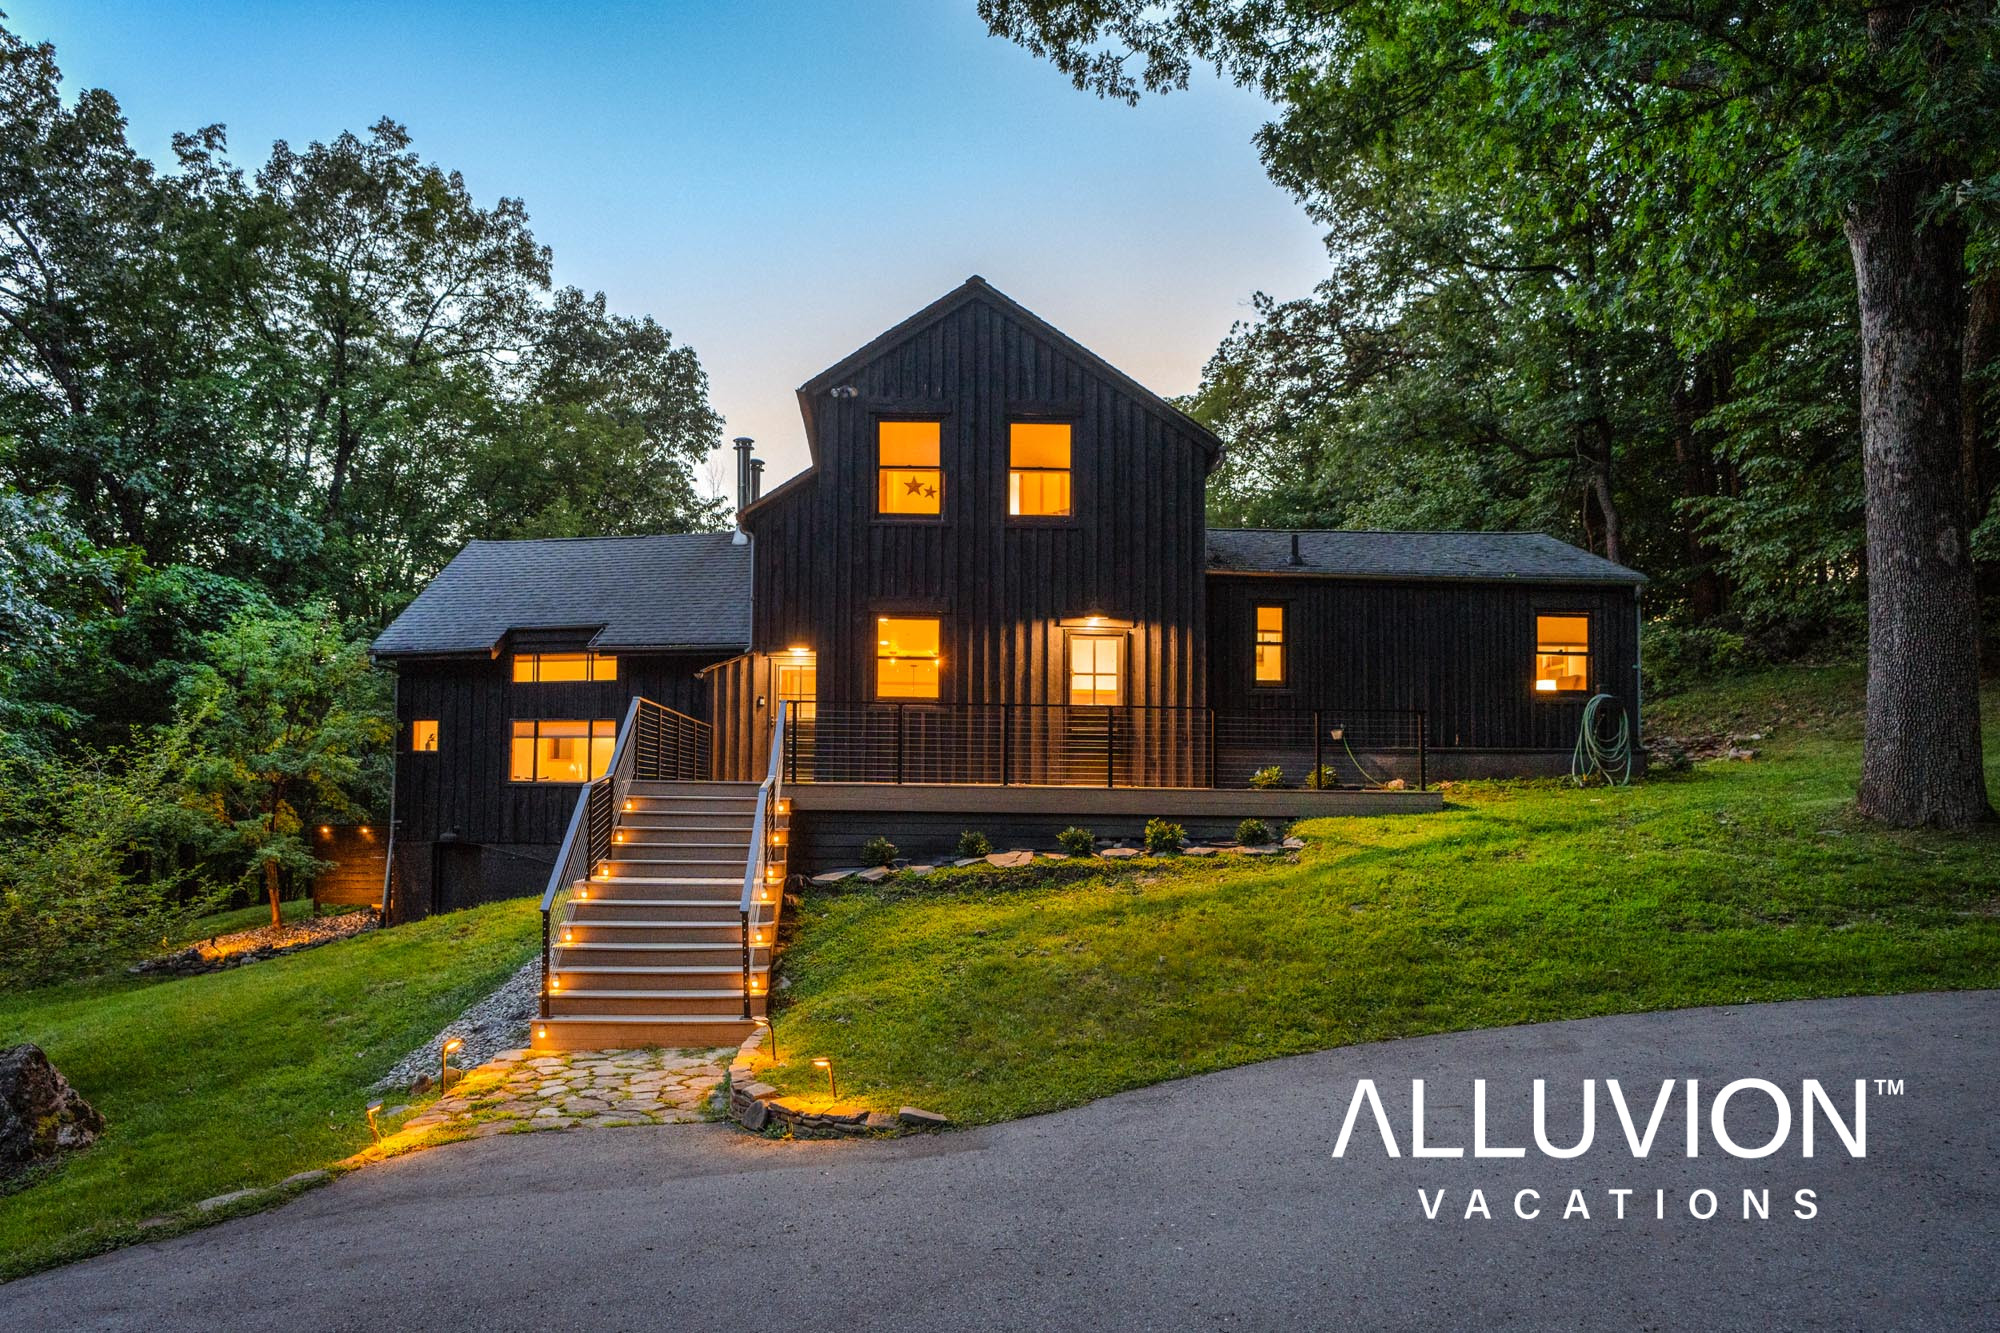 Escape the City and Relax in this Modern Rustic Airbnb Home in Warwick, NY